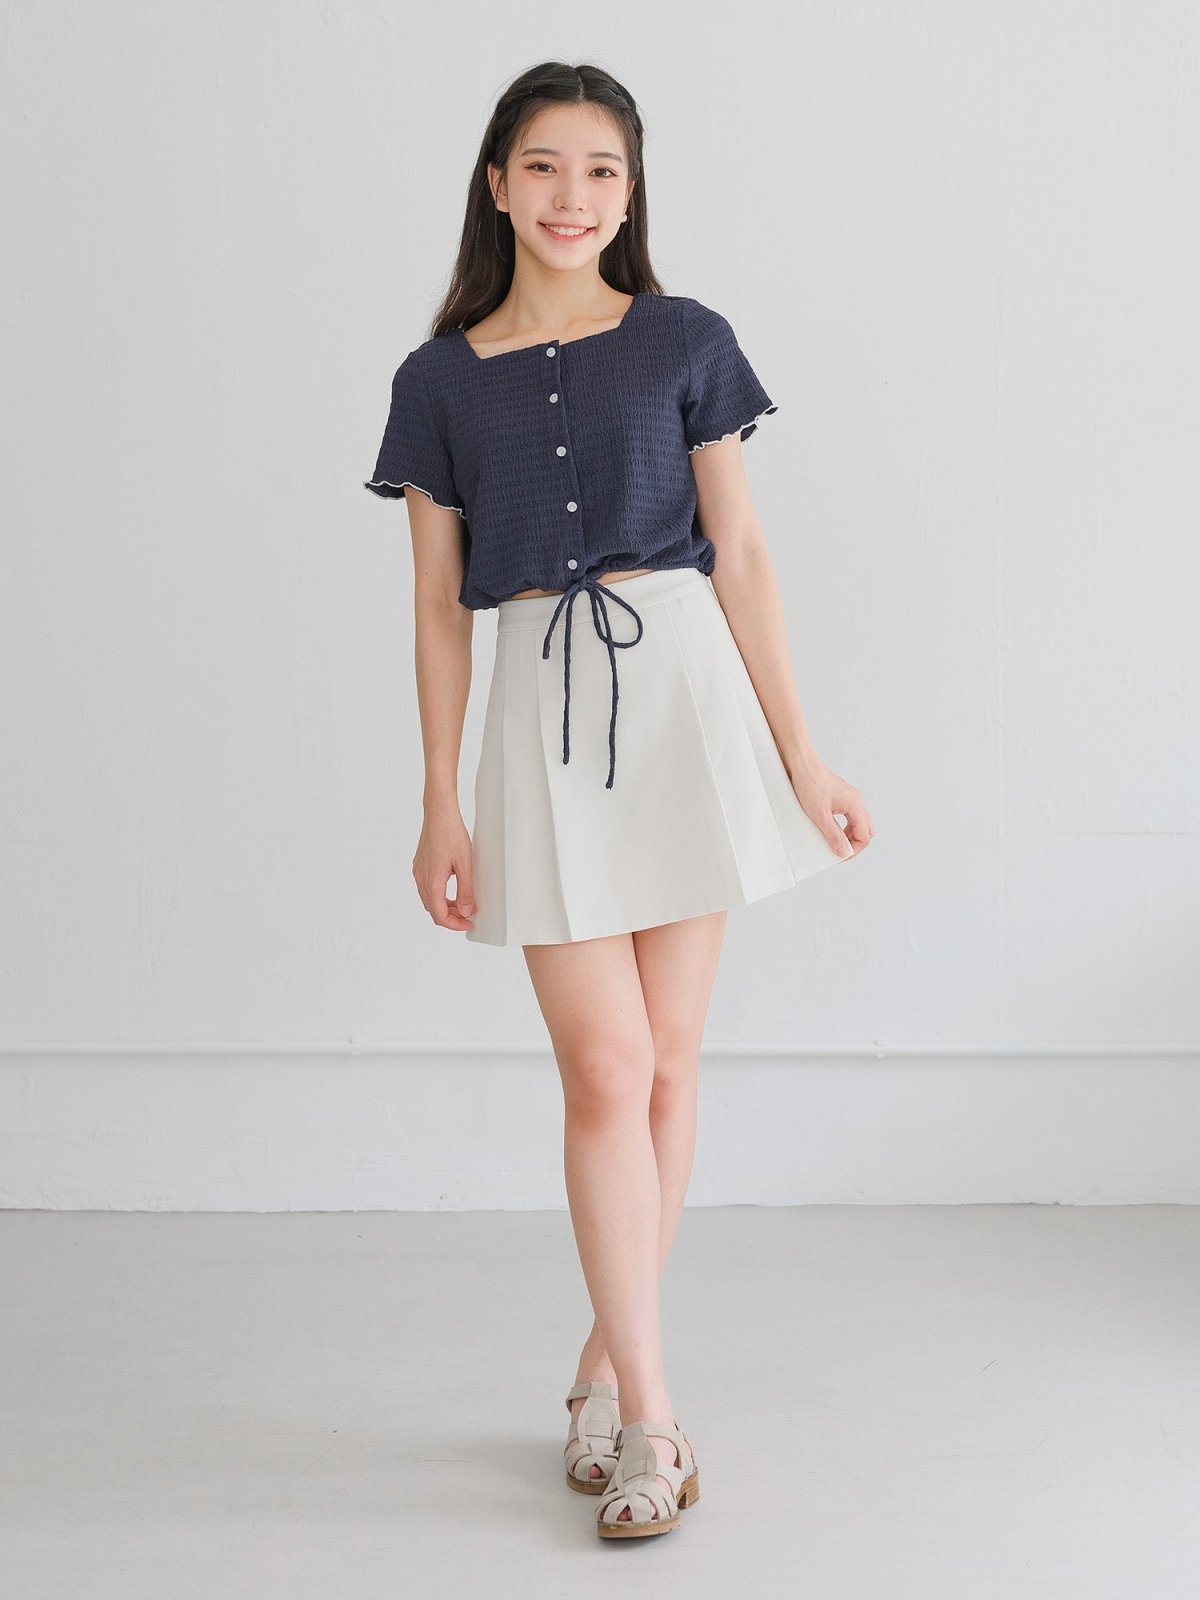 Moon Square Neck Wrinkle Top - DAG-DD0413-23NavyS - Navy With White Hem - S - D'ZAGE Designs